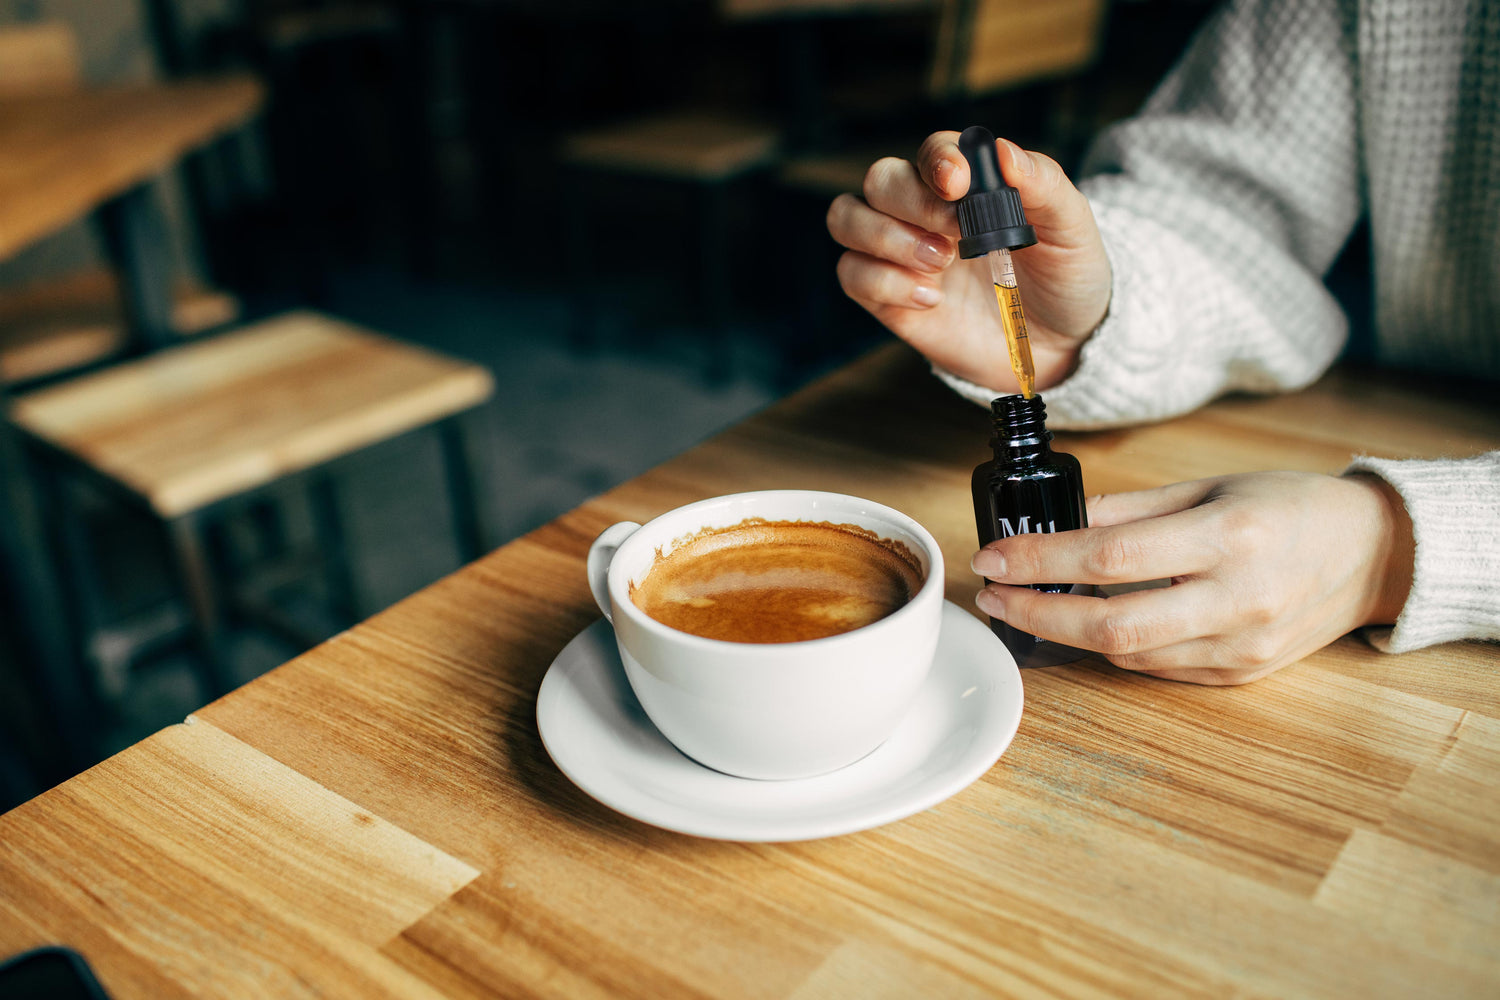 A person holding the Mµ dropper bottle and adding the mushrooms extract to her coffee in a minilistic cafe